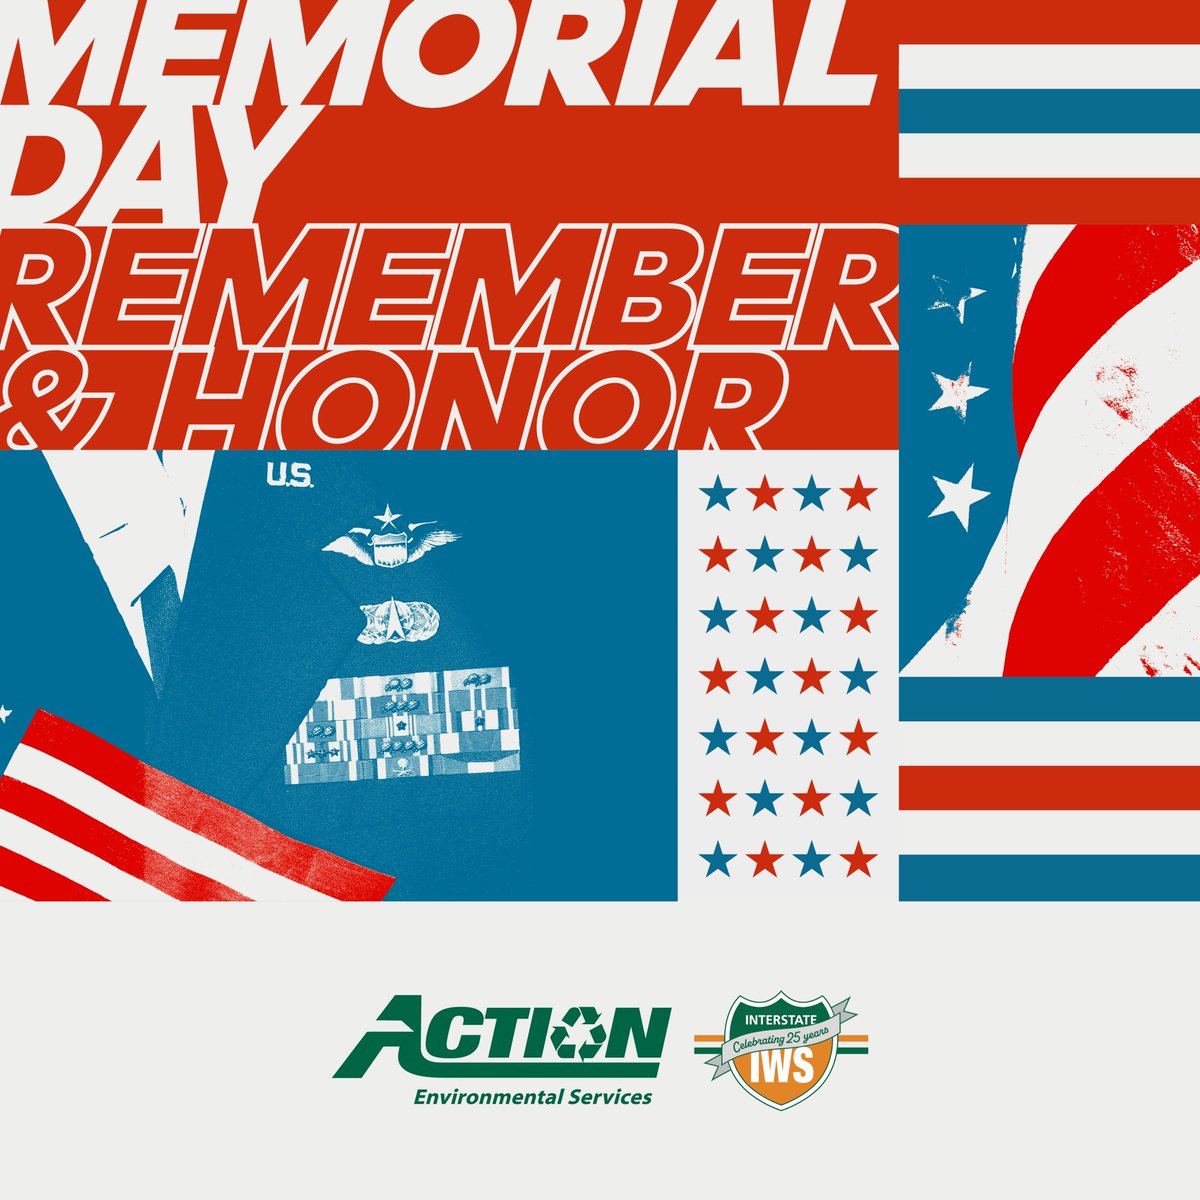 Happy Memorial Day! Today we honor and remember those who have given everything for our freedom.
#InterstateWaste #InterstateWasteServices #ActionEnvironmental #ActionCarting #MemorialDay #HappyMemorialDay #HonorTheBrave #RememberAndHonor #ThankYou